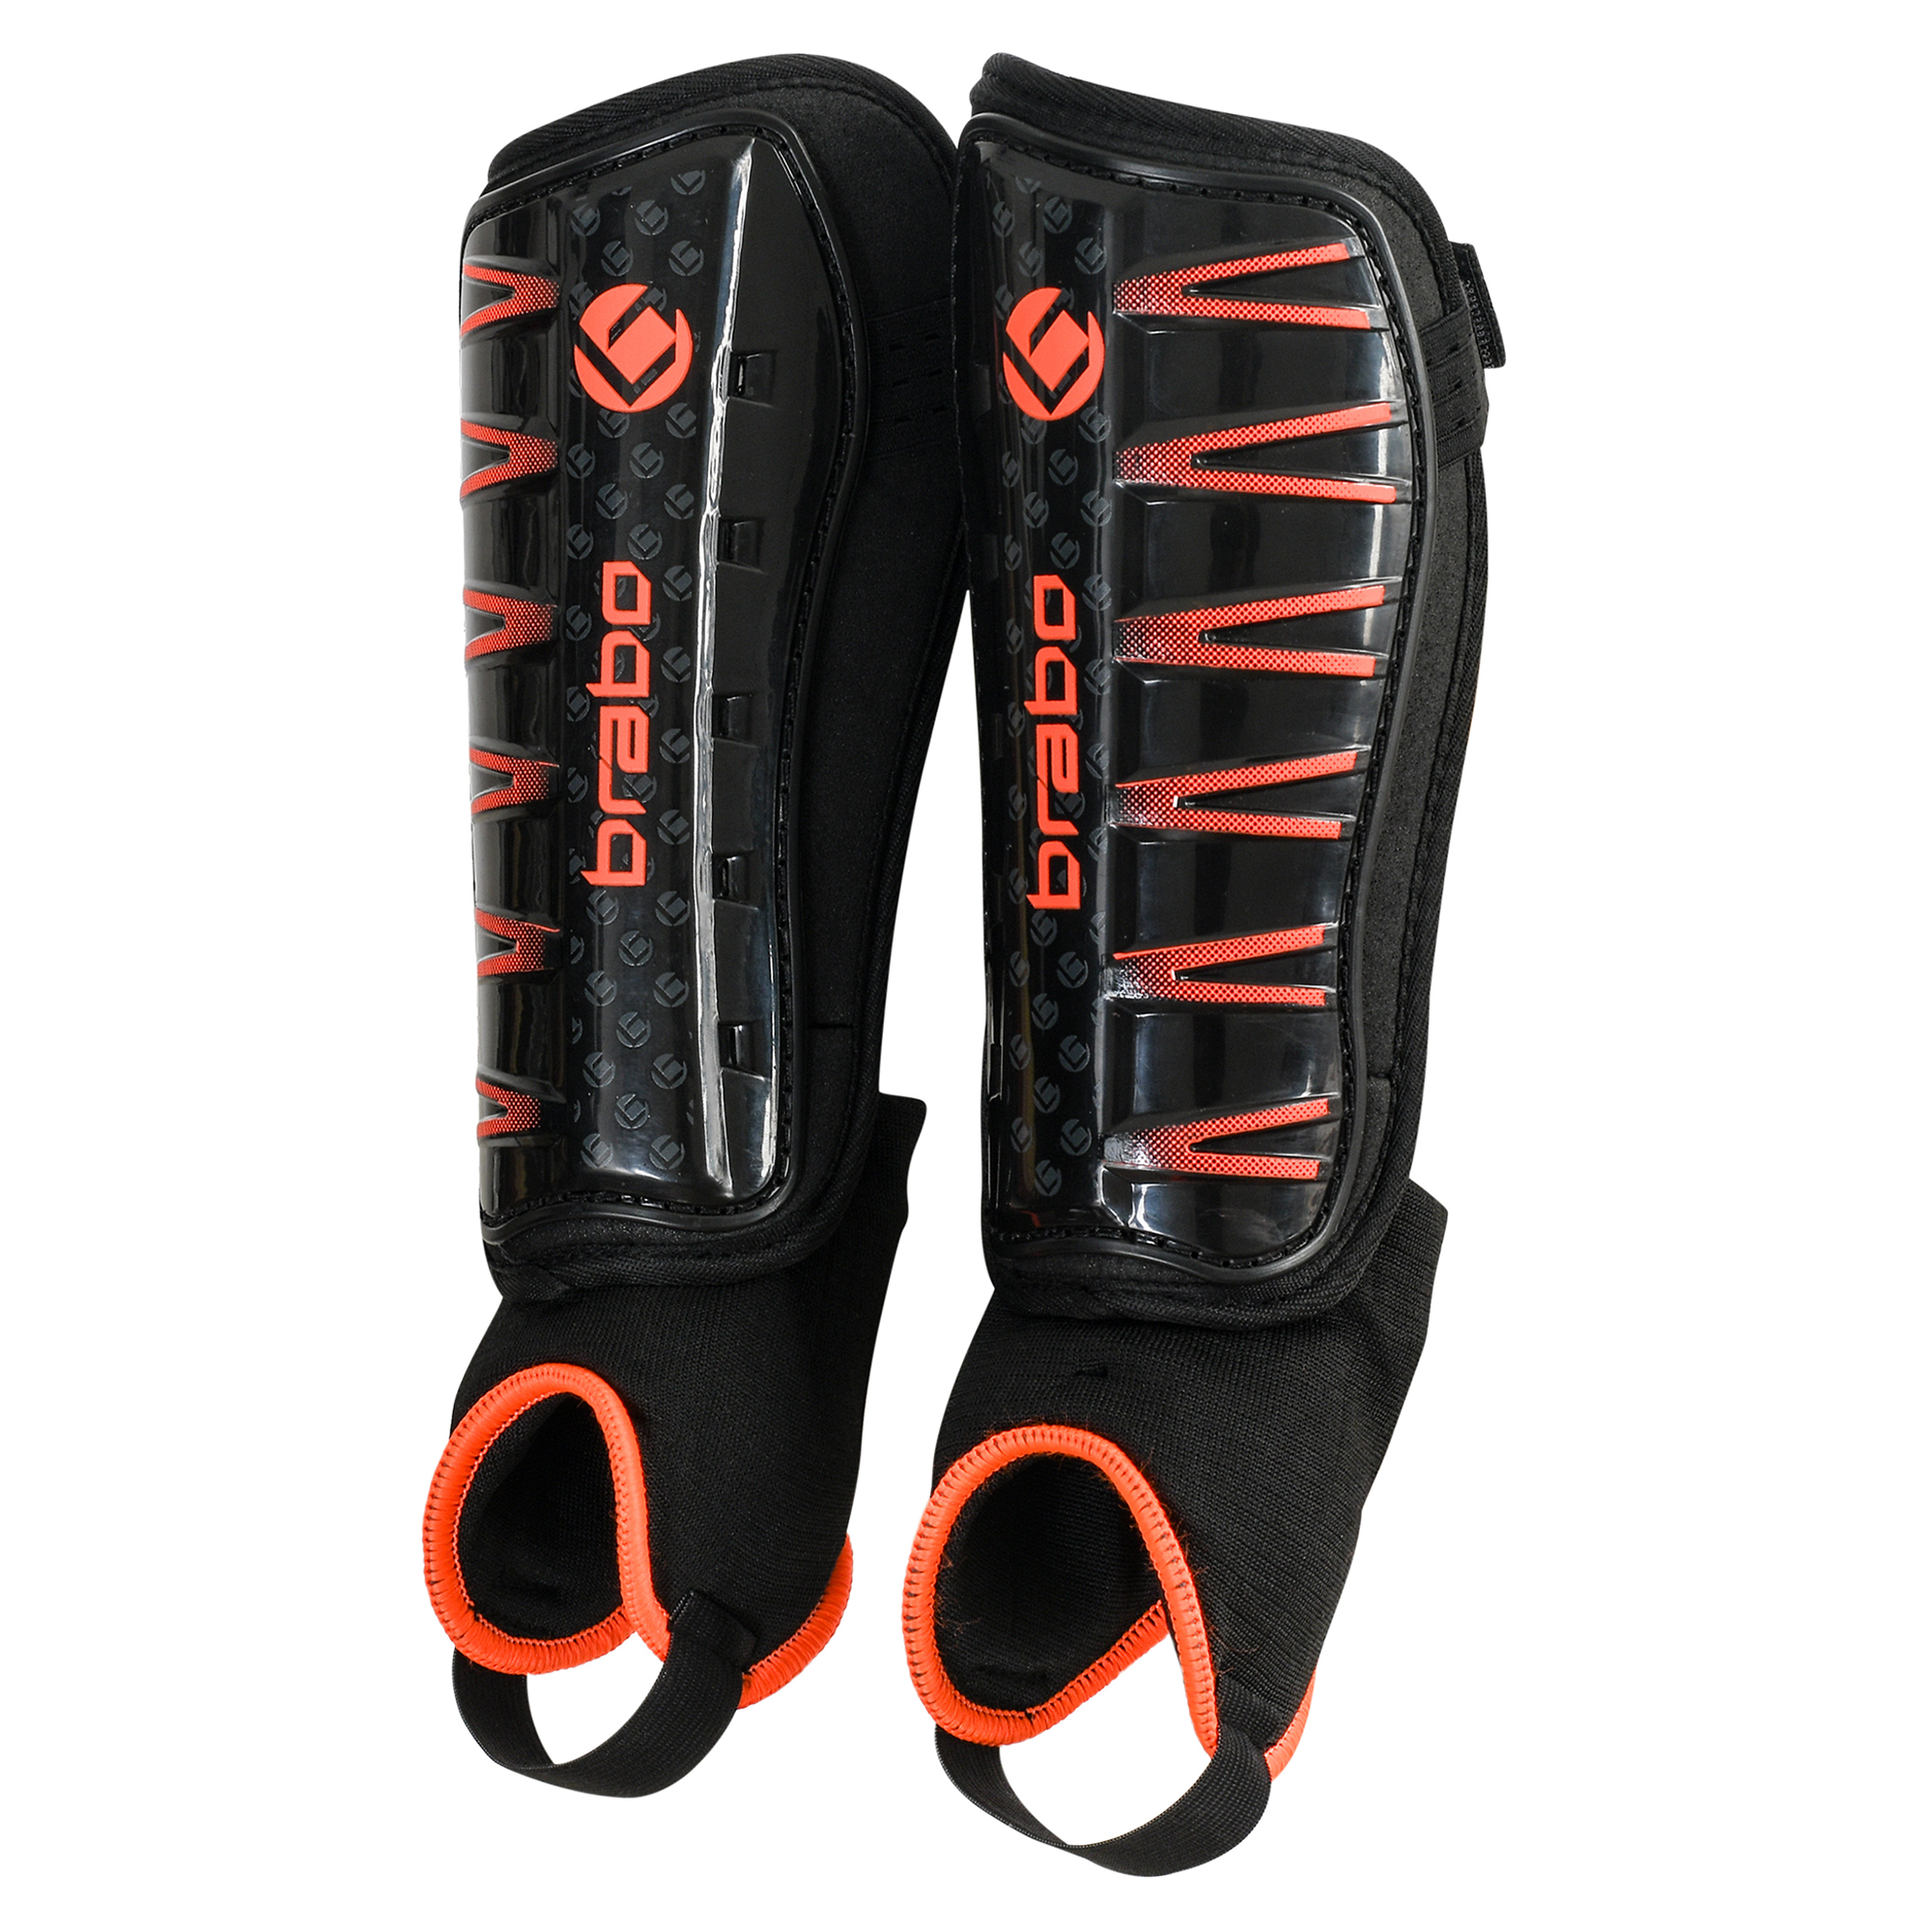 Shinguard F4 with Anklesock